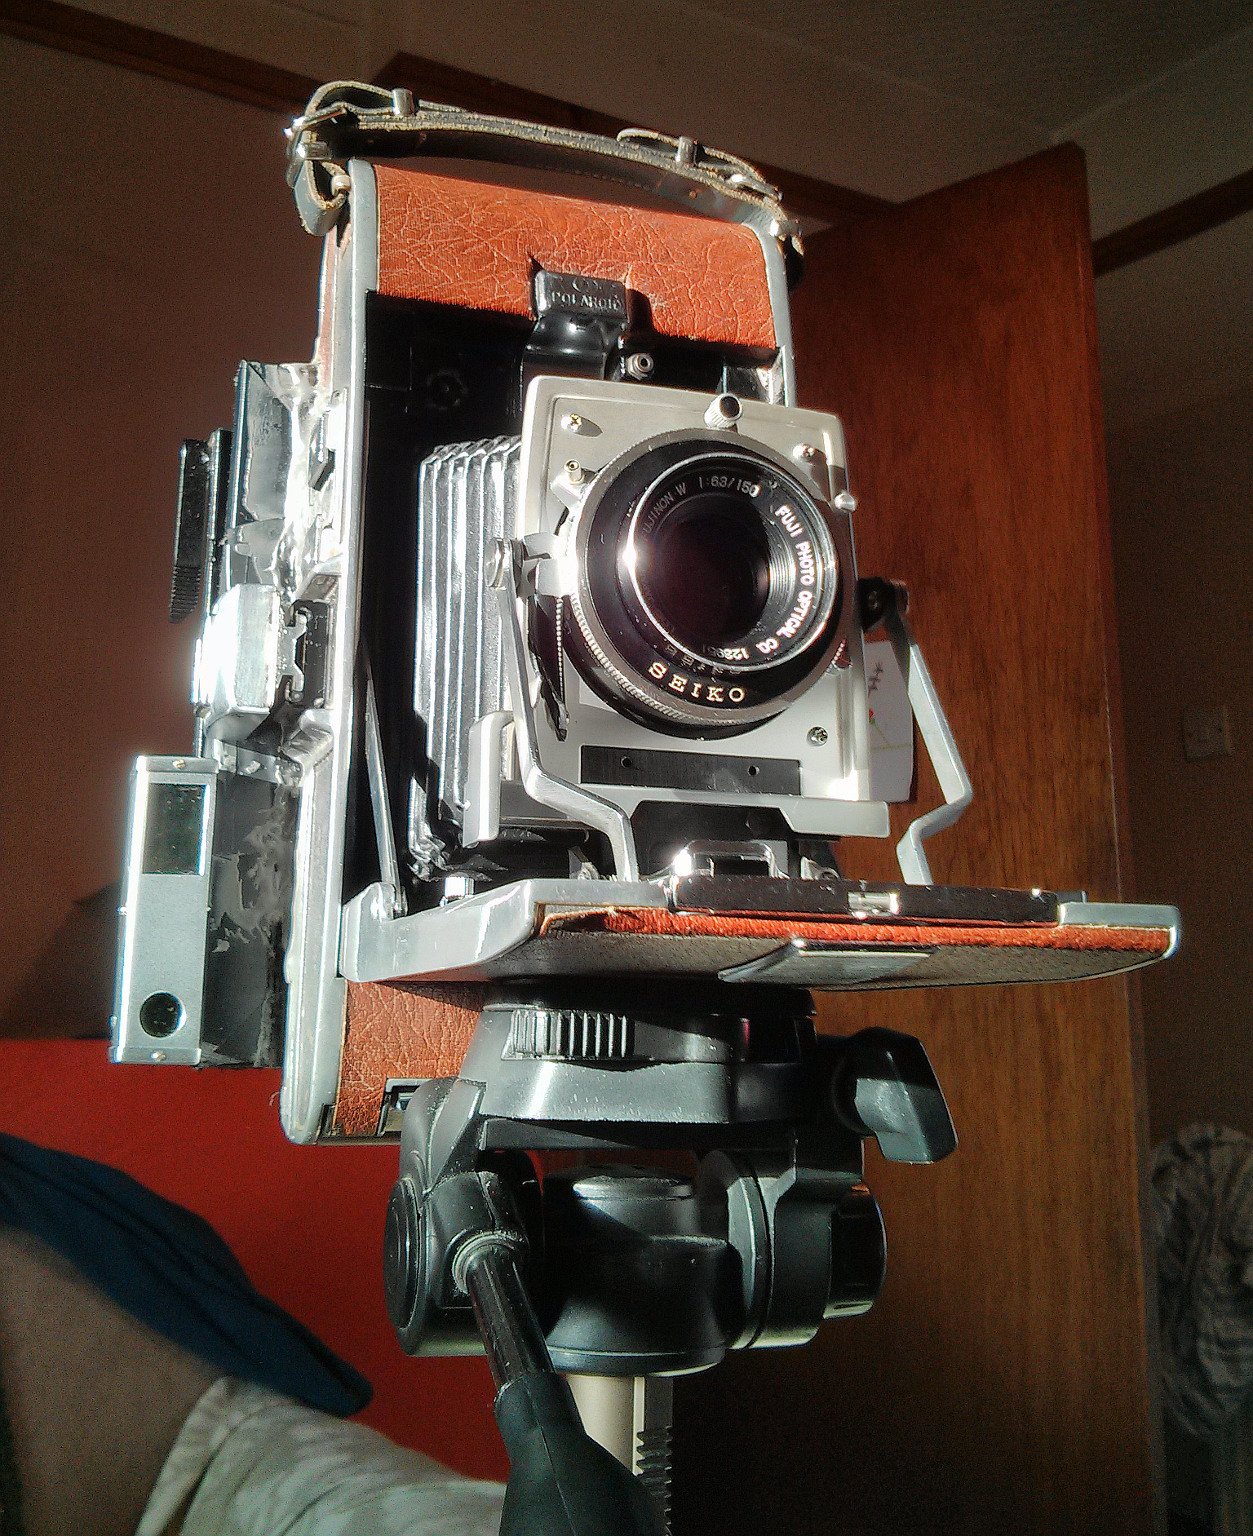 This Polaroid Camera Was Converted to Shoot Large Format